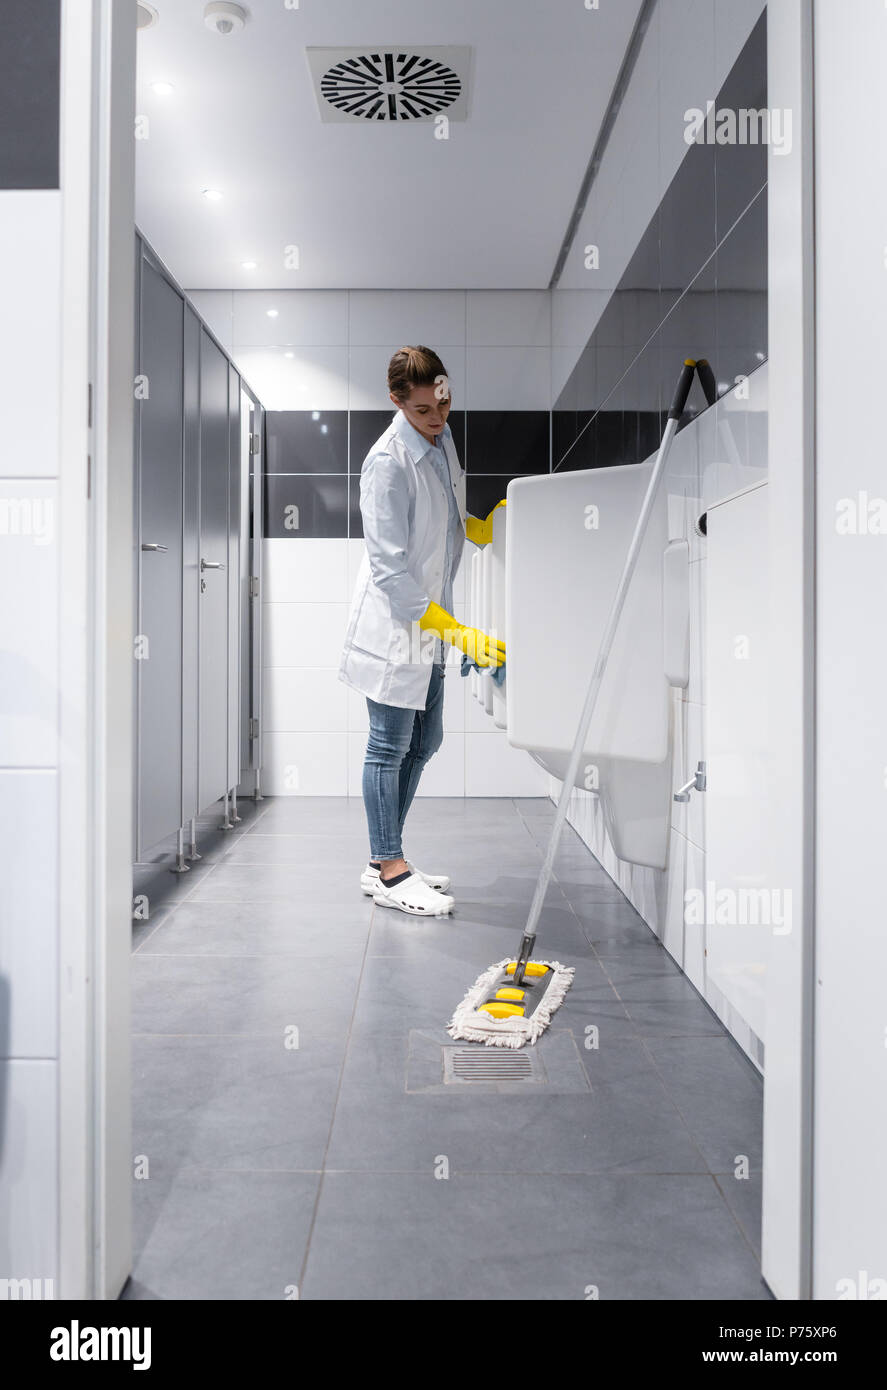 Janitor woman cleaning urinals in public toilet  Stock Photo